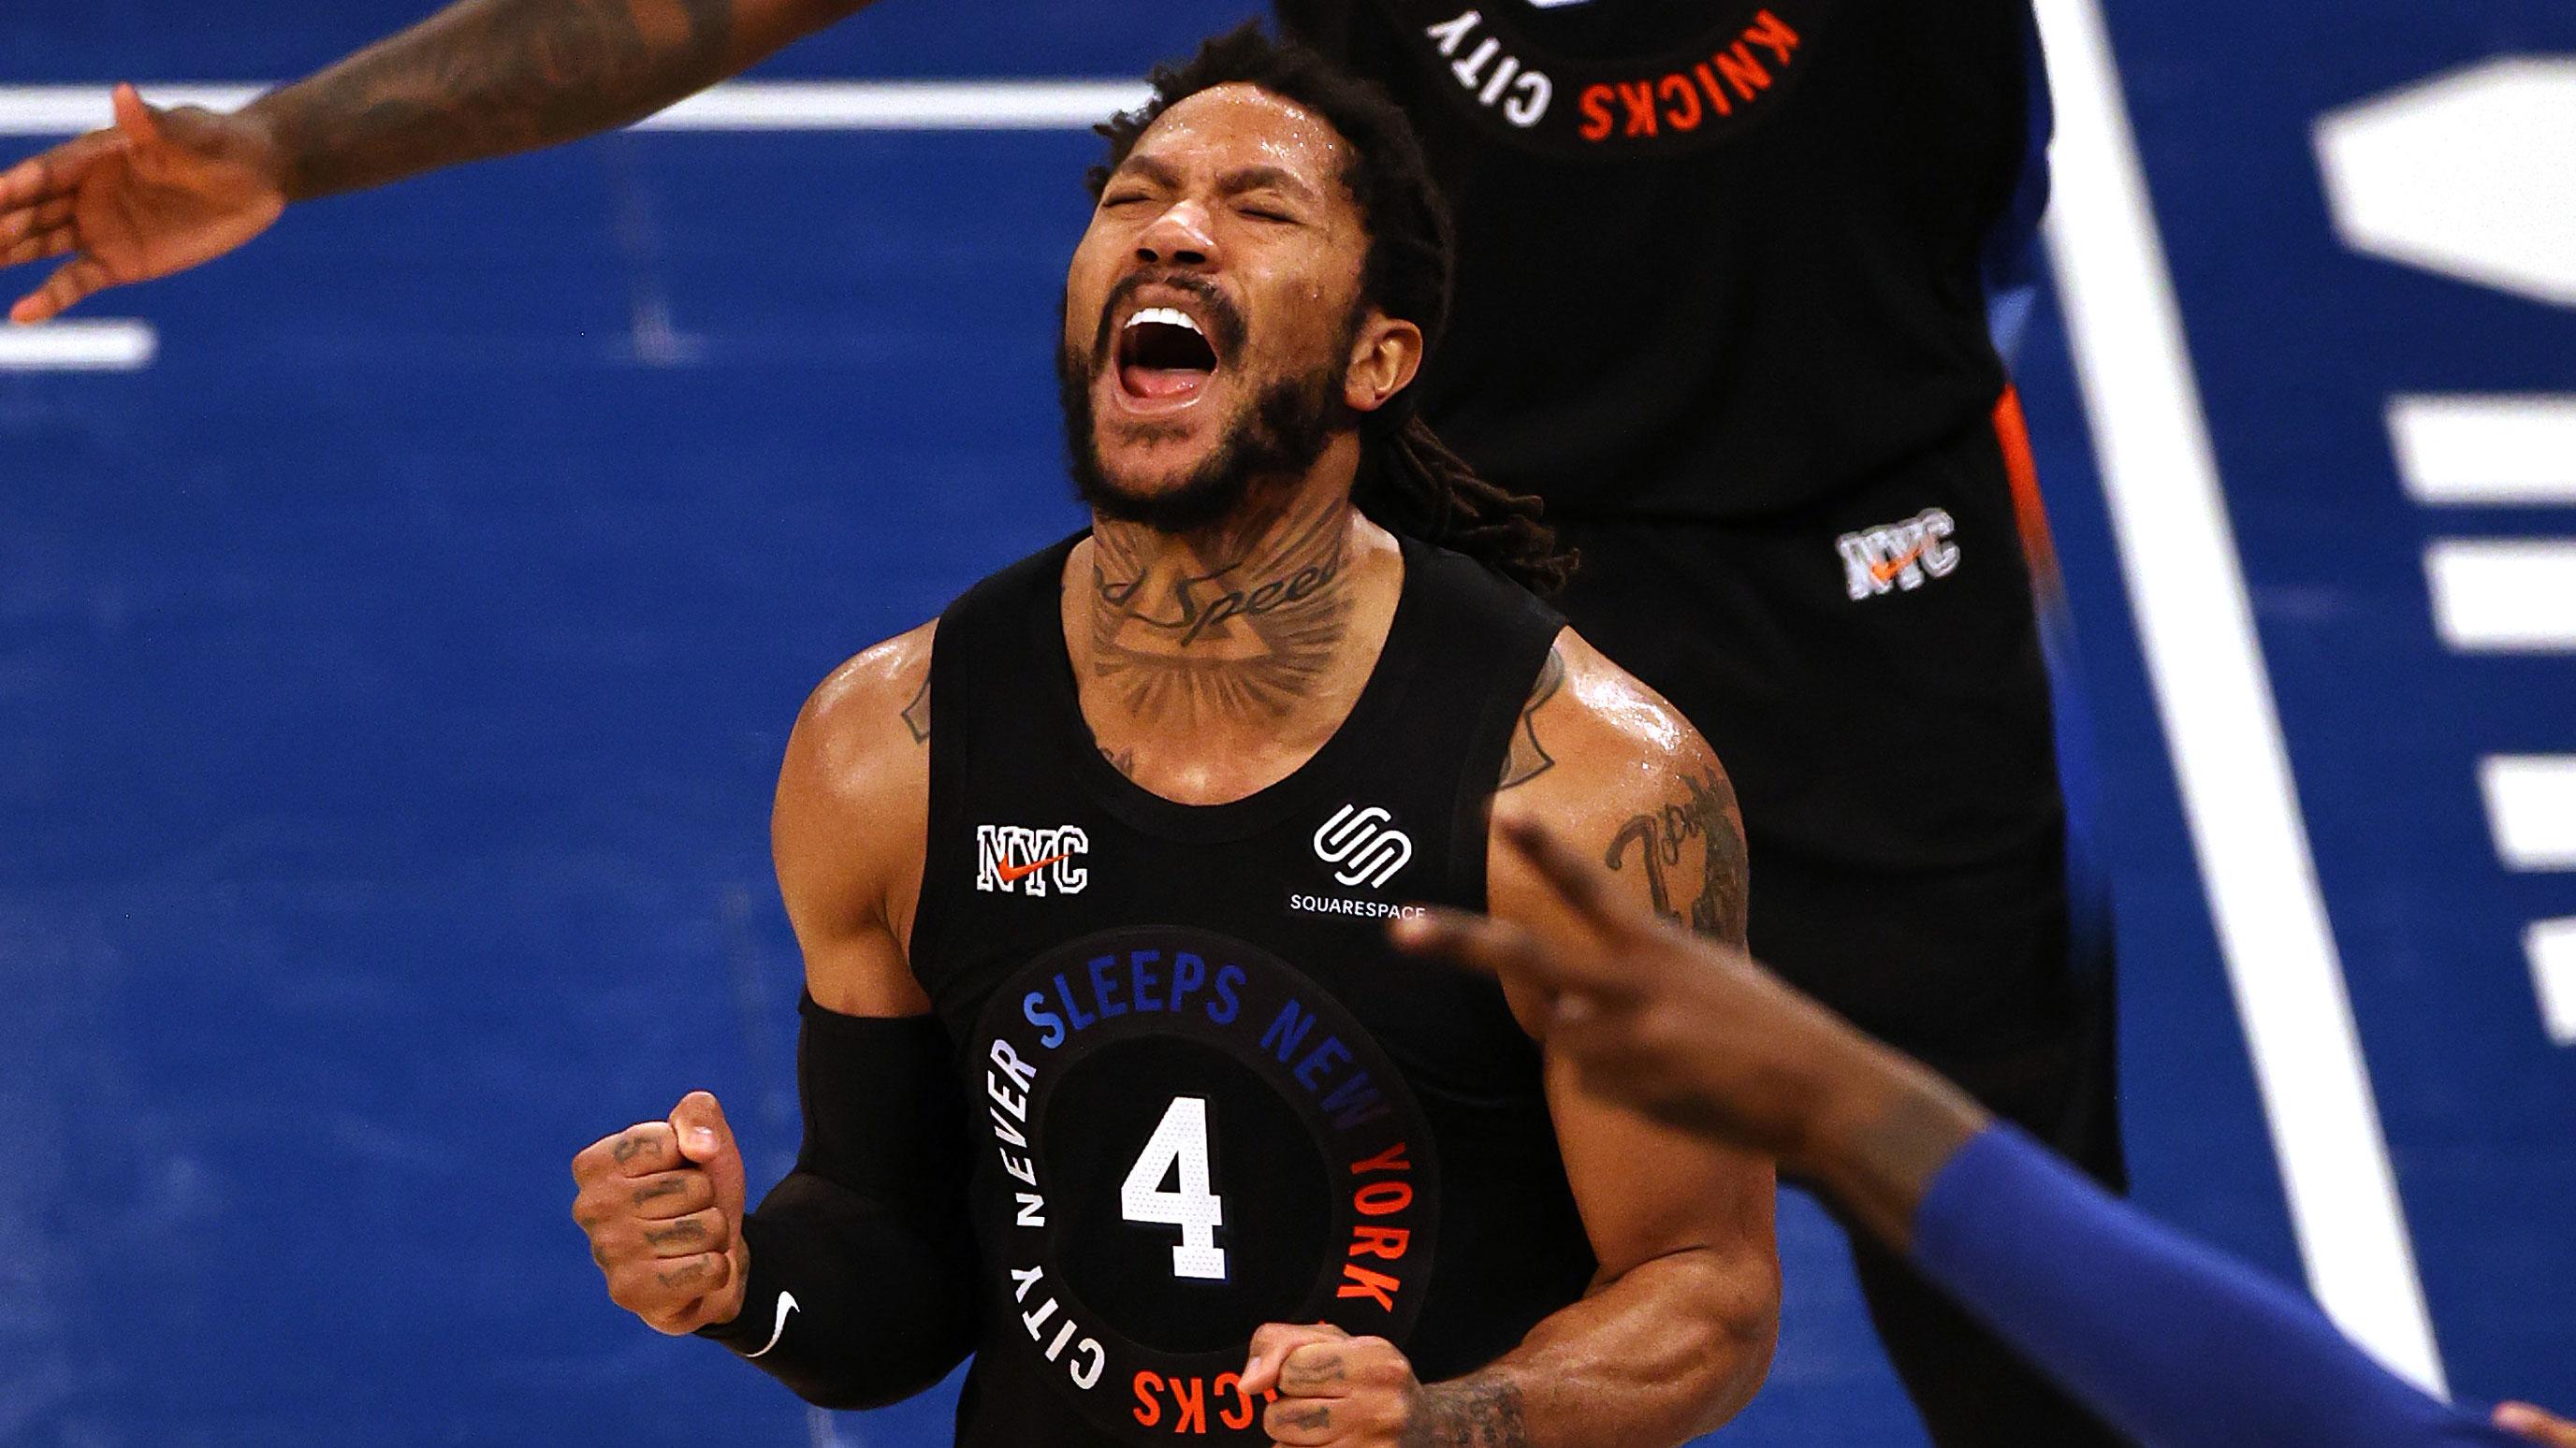 May 26, 2021; New York, New York, USA; New York Knicks guard Derrick Rose (4) reacts against the Atlanta Hawks during the second half of game two of the Eastern Conference quarterfinal at Madison Square Garden. Mandatory Credit: Elsa/POOL PHOTOS-USA TODAY Sports / Elsa/POOL PHOTOS-USA TODAY Sports